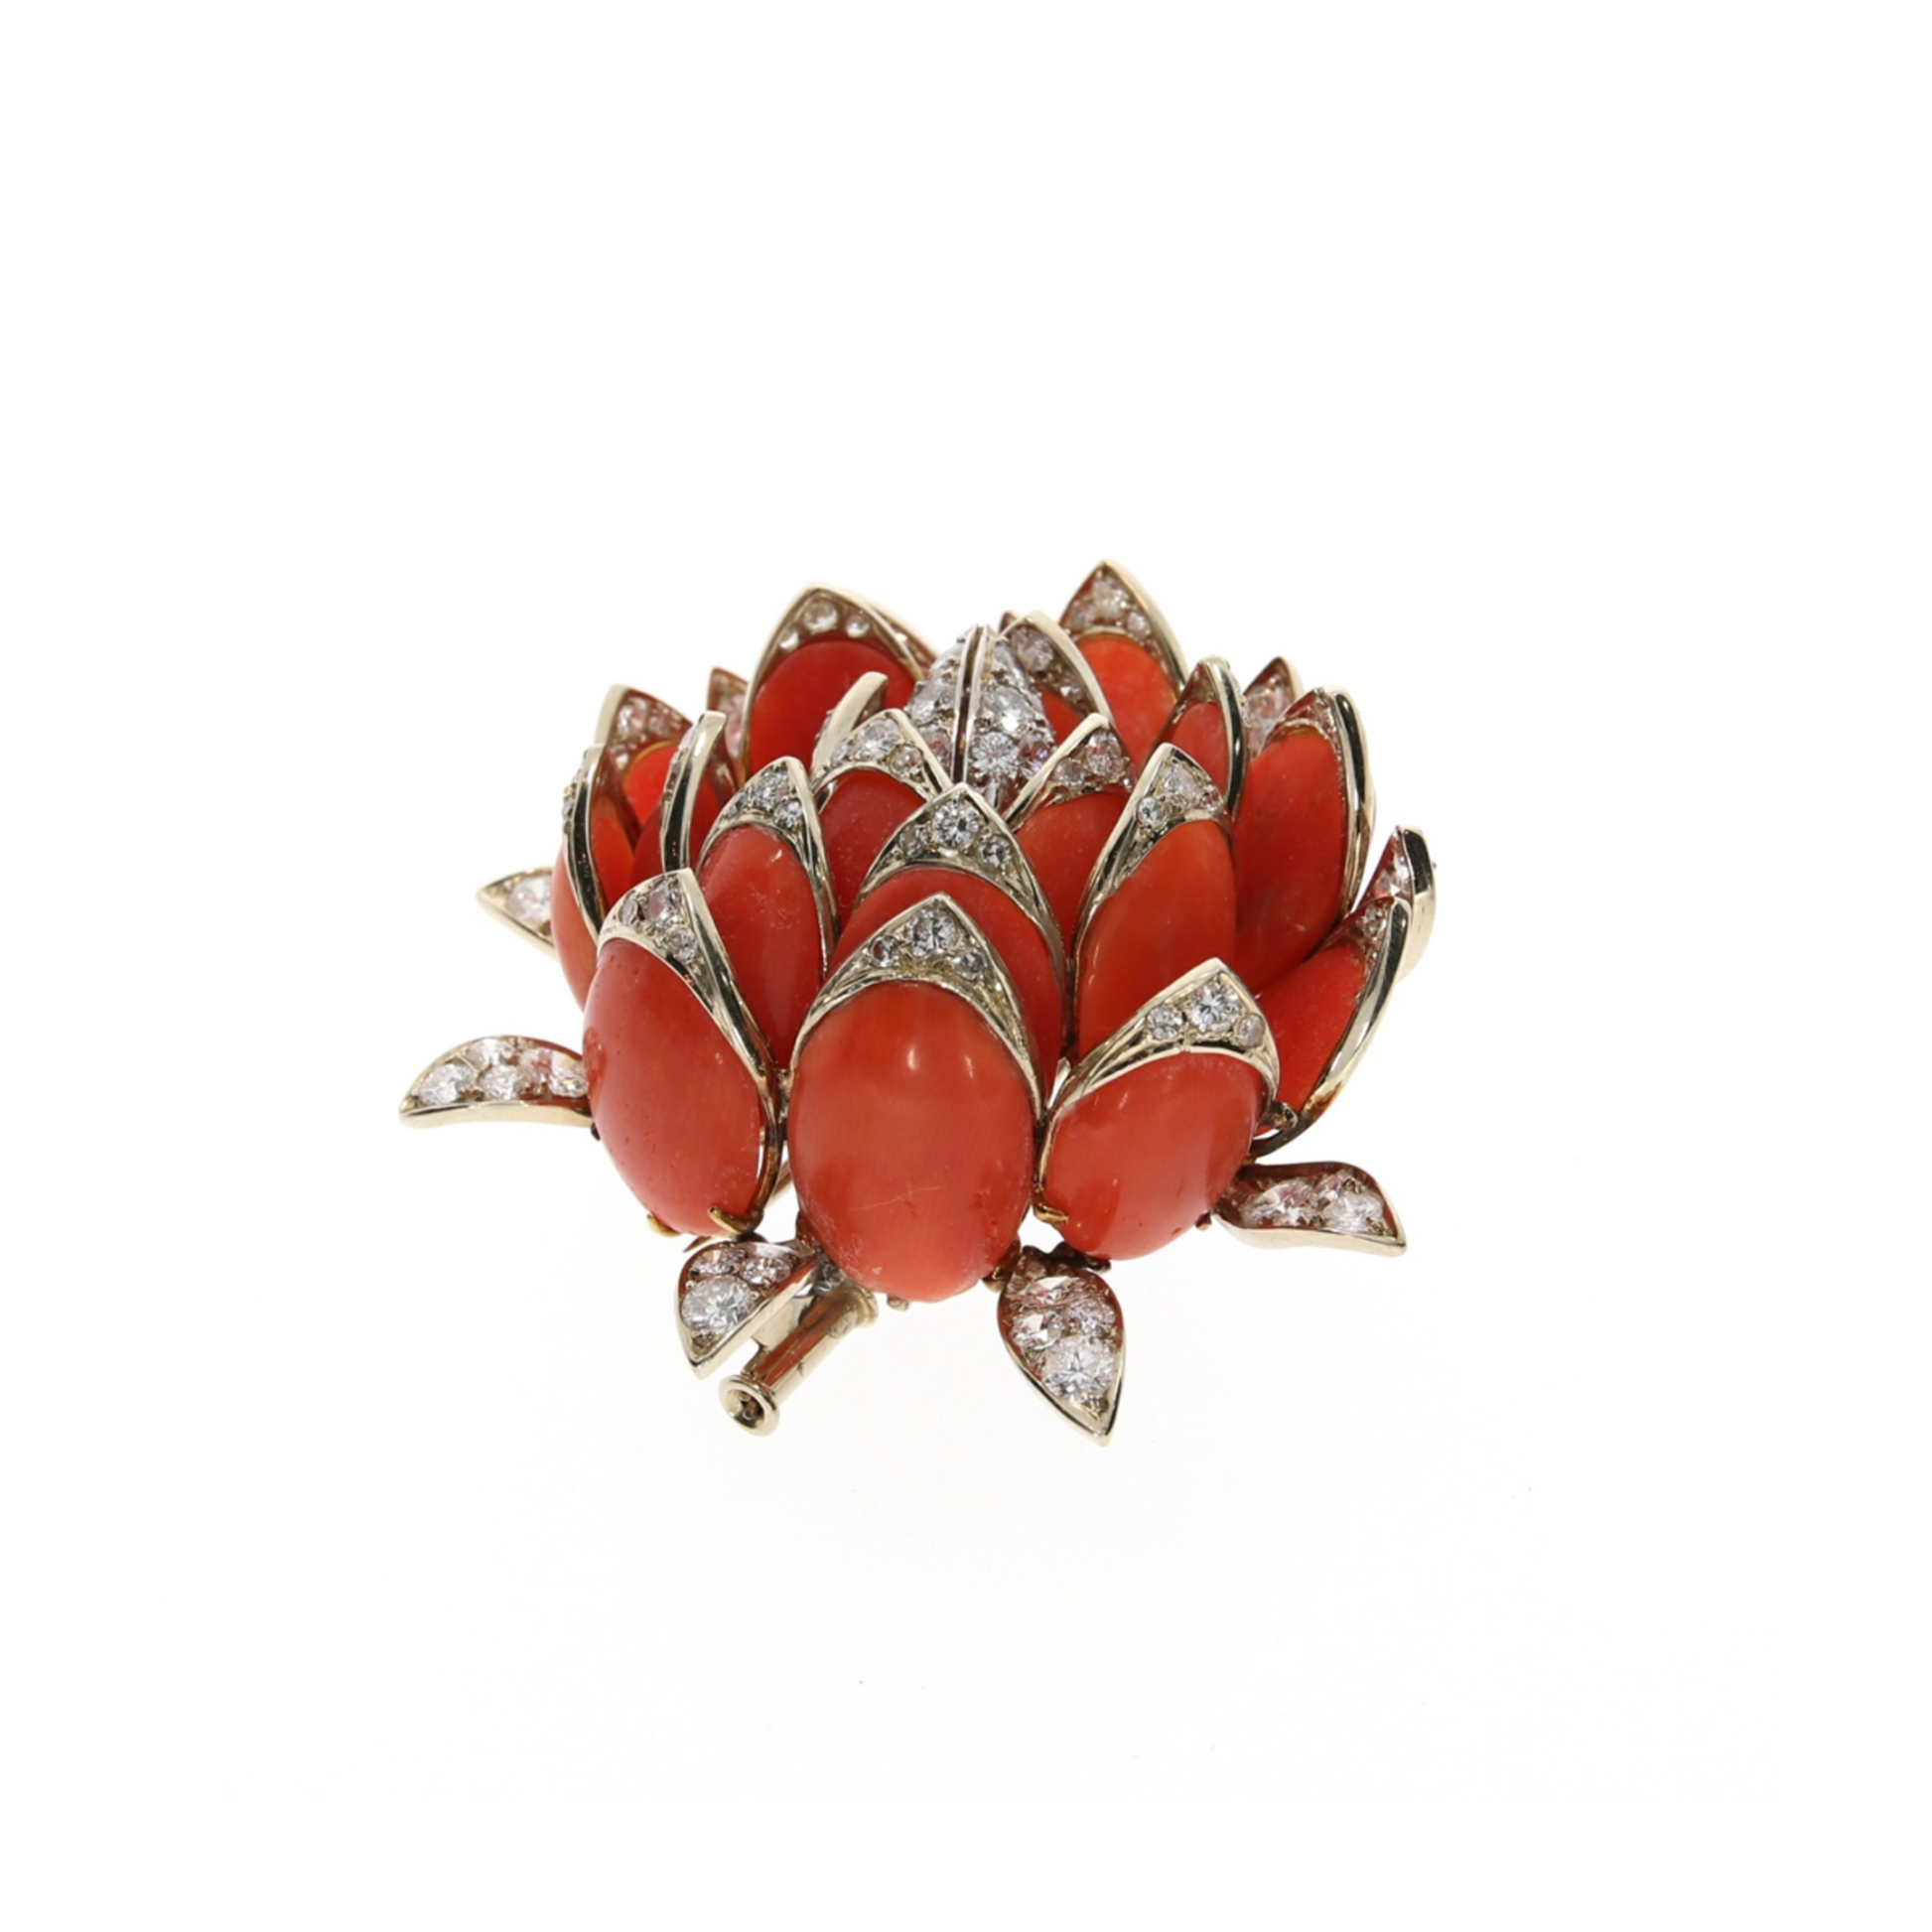 Enrico Serafini 1950s 18KT Yellow Gold Coral & Diamond Water Lily Brooch front